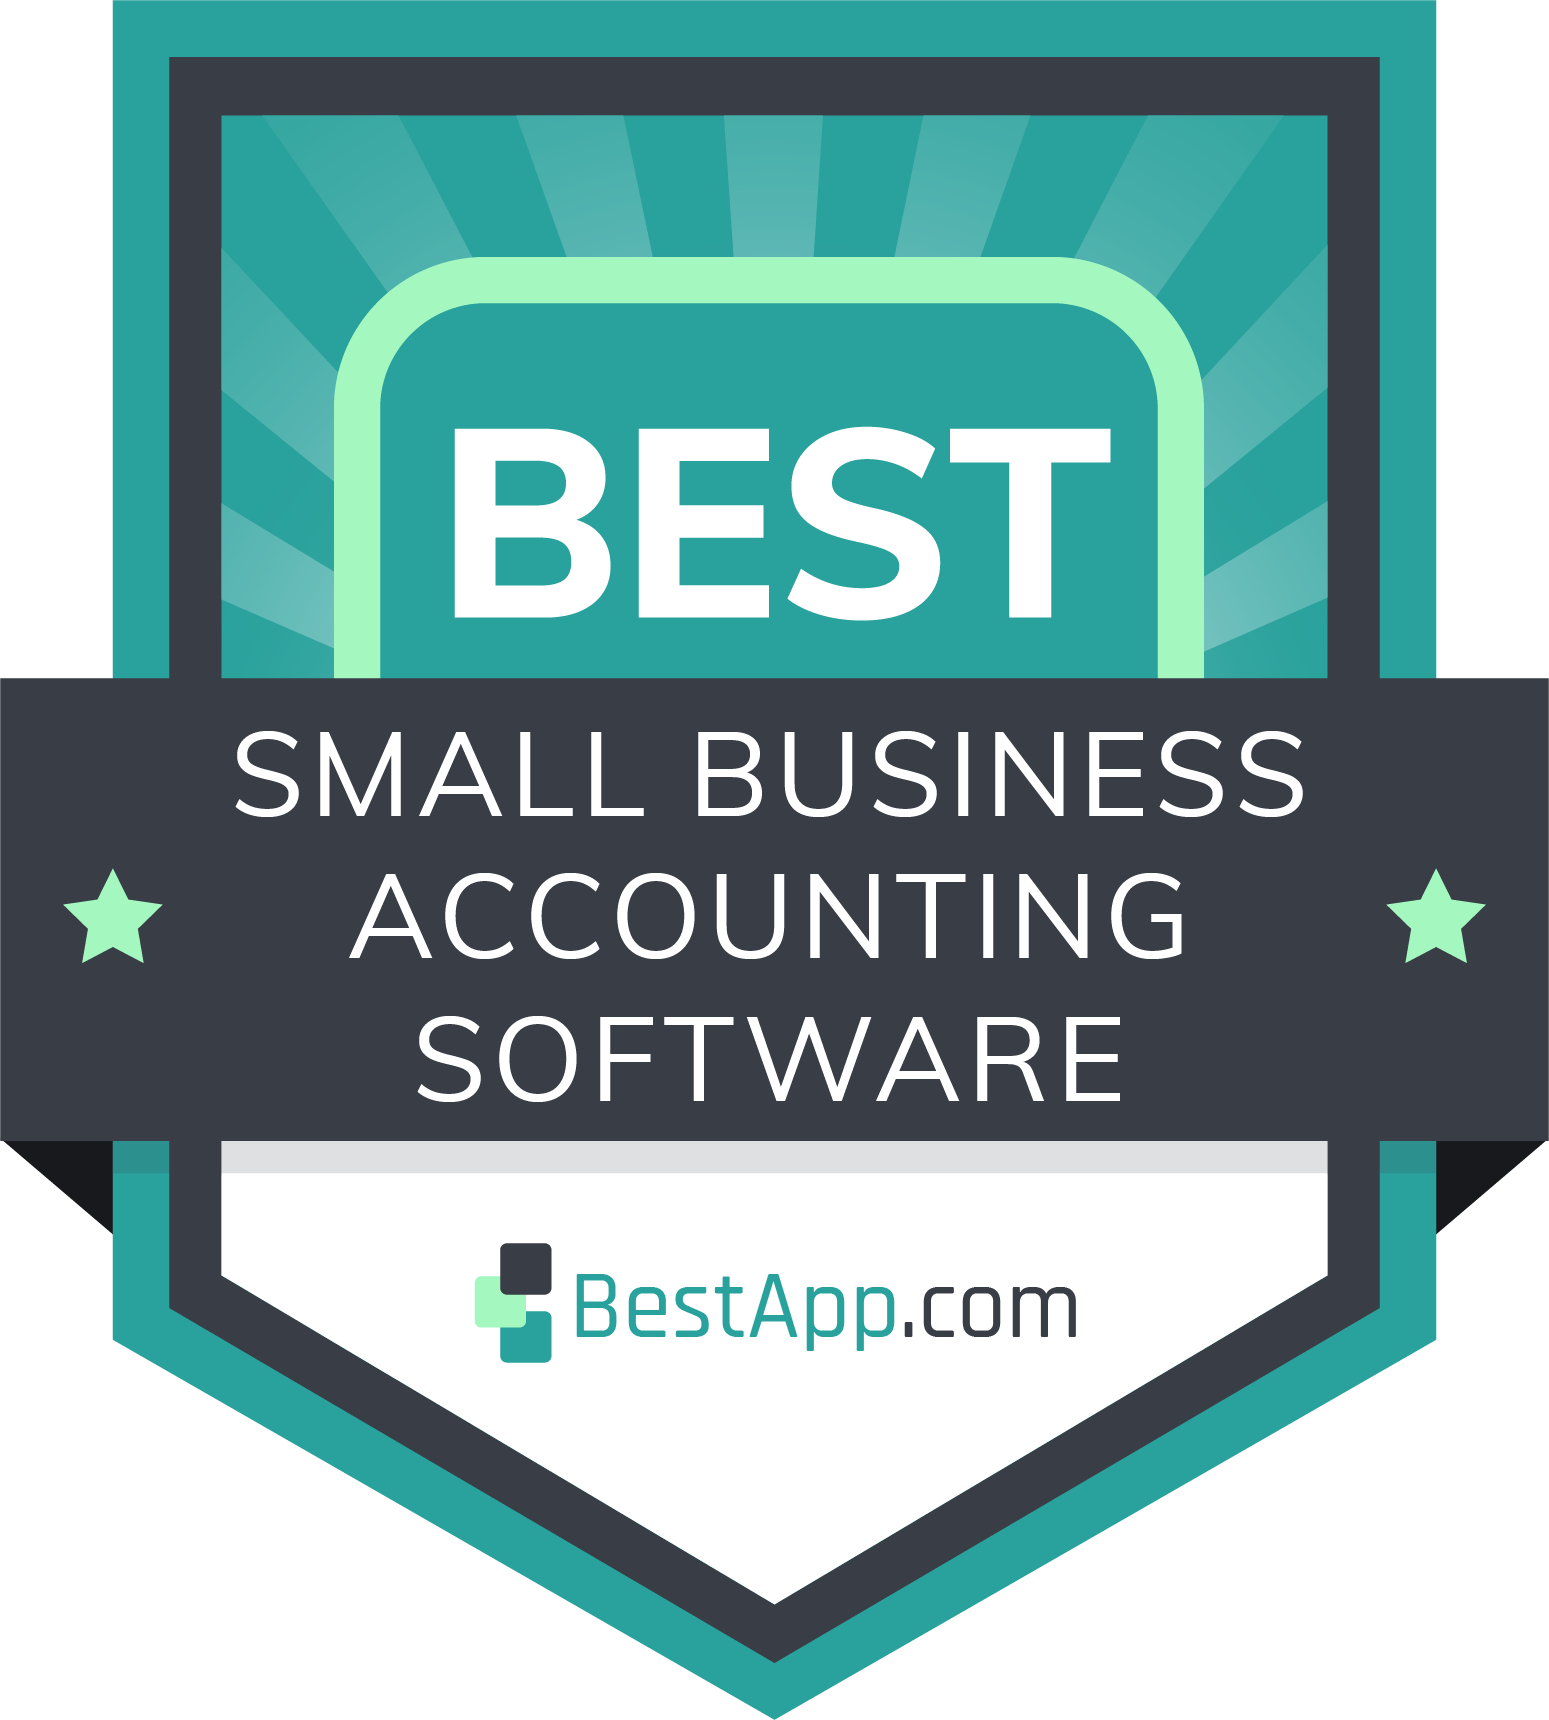 best small business accounting software badge